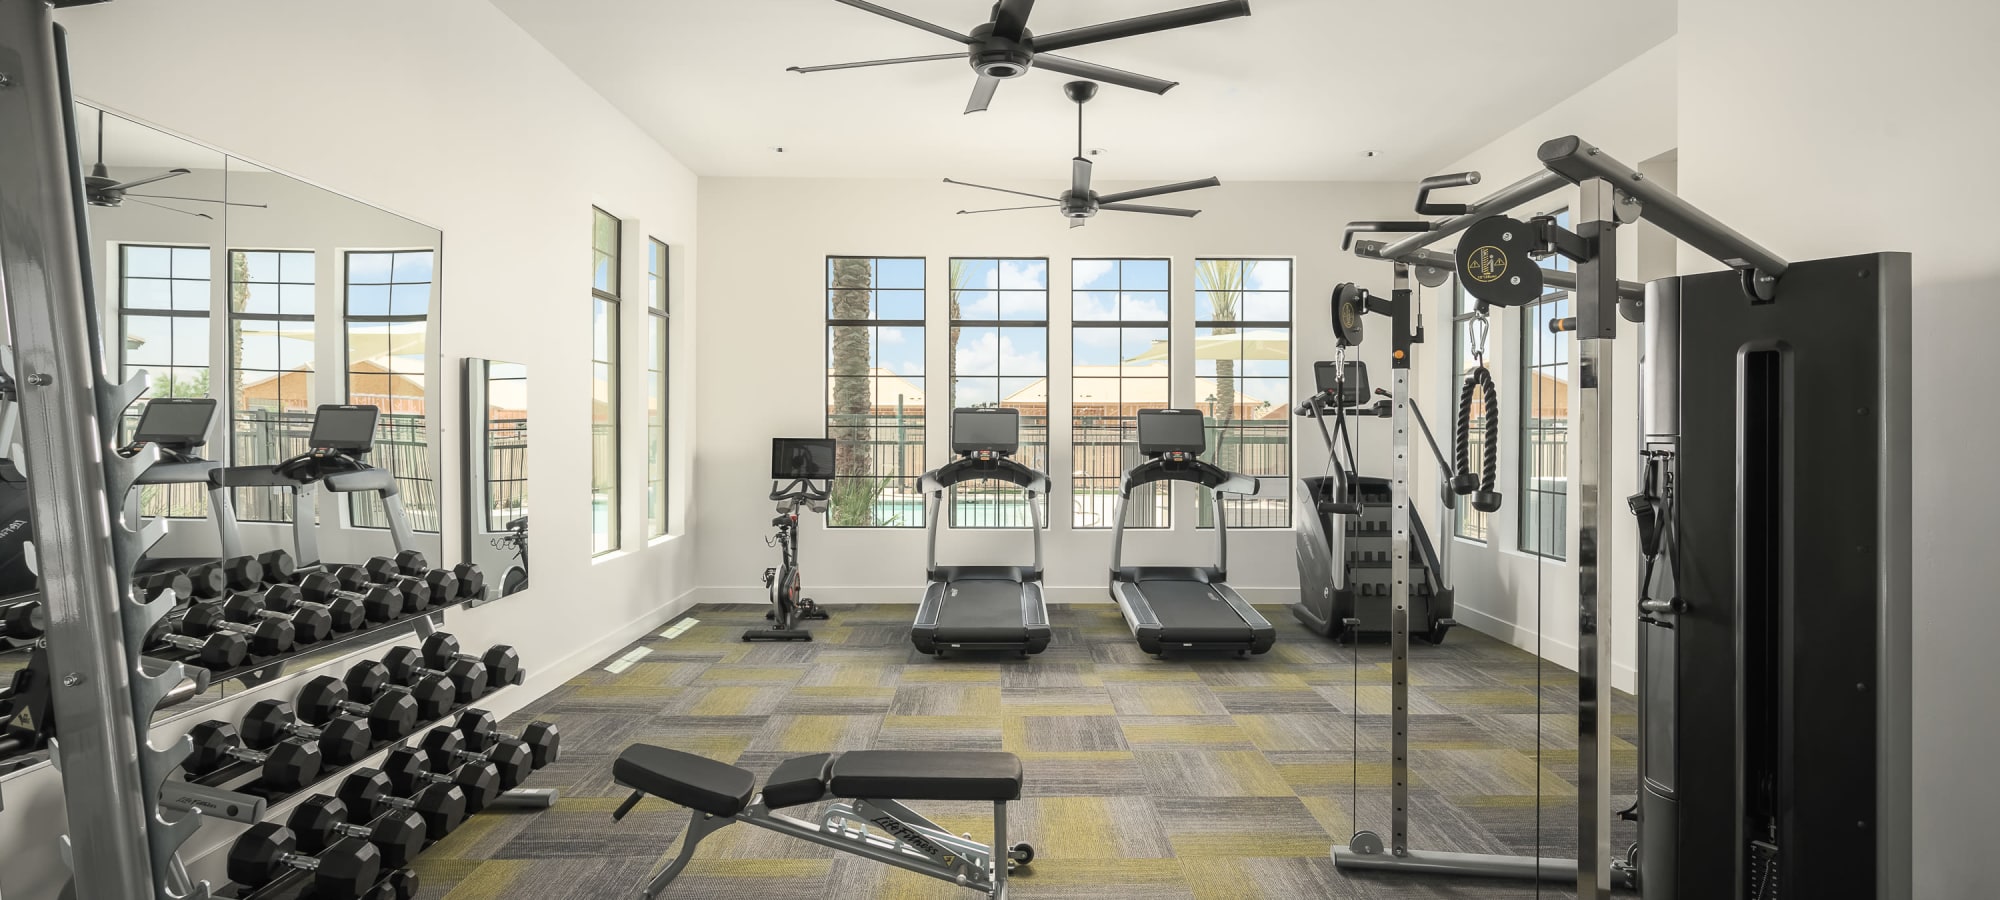 Free weights with cable machines and treadmills at Sobremesa Villas in Surprise, Arizona